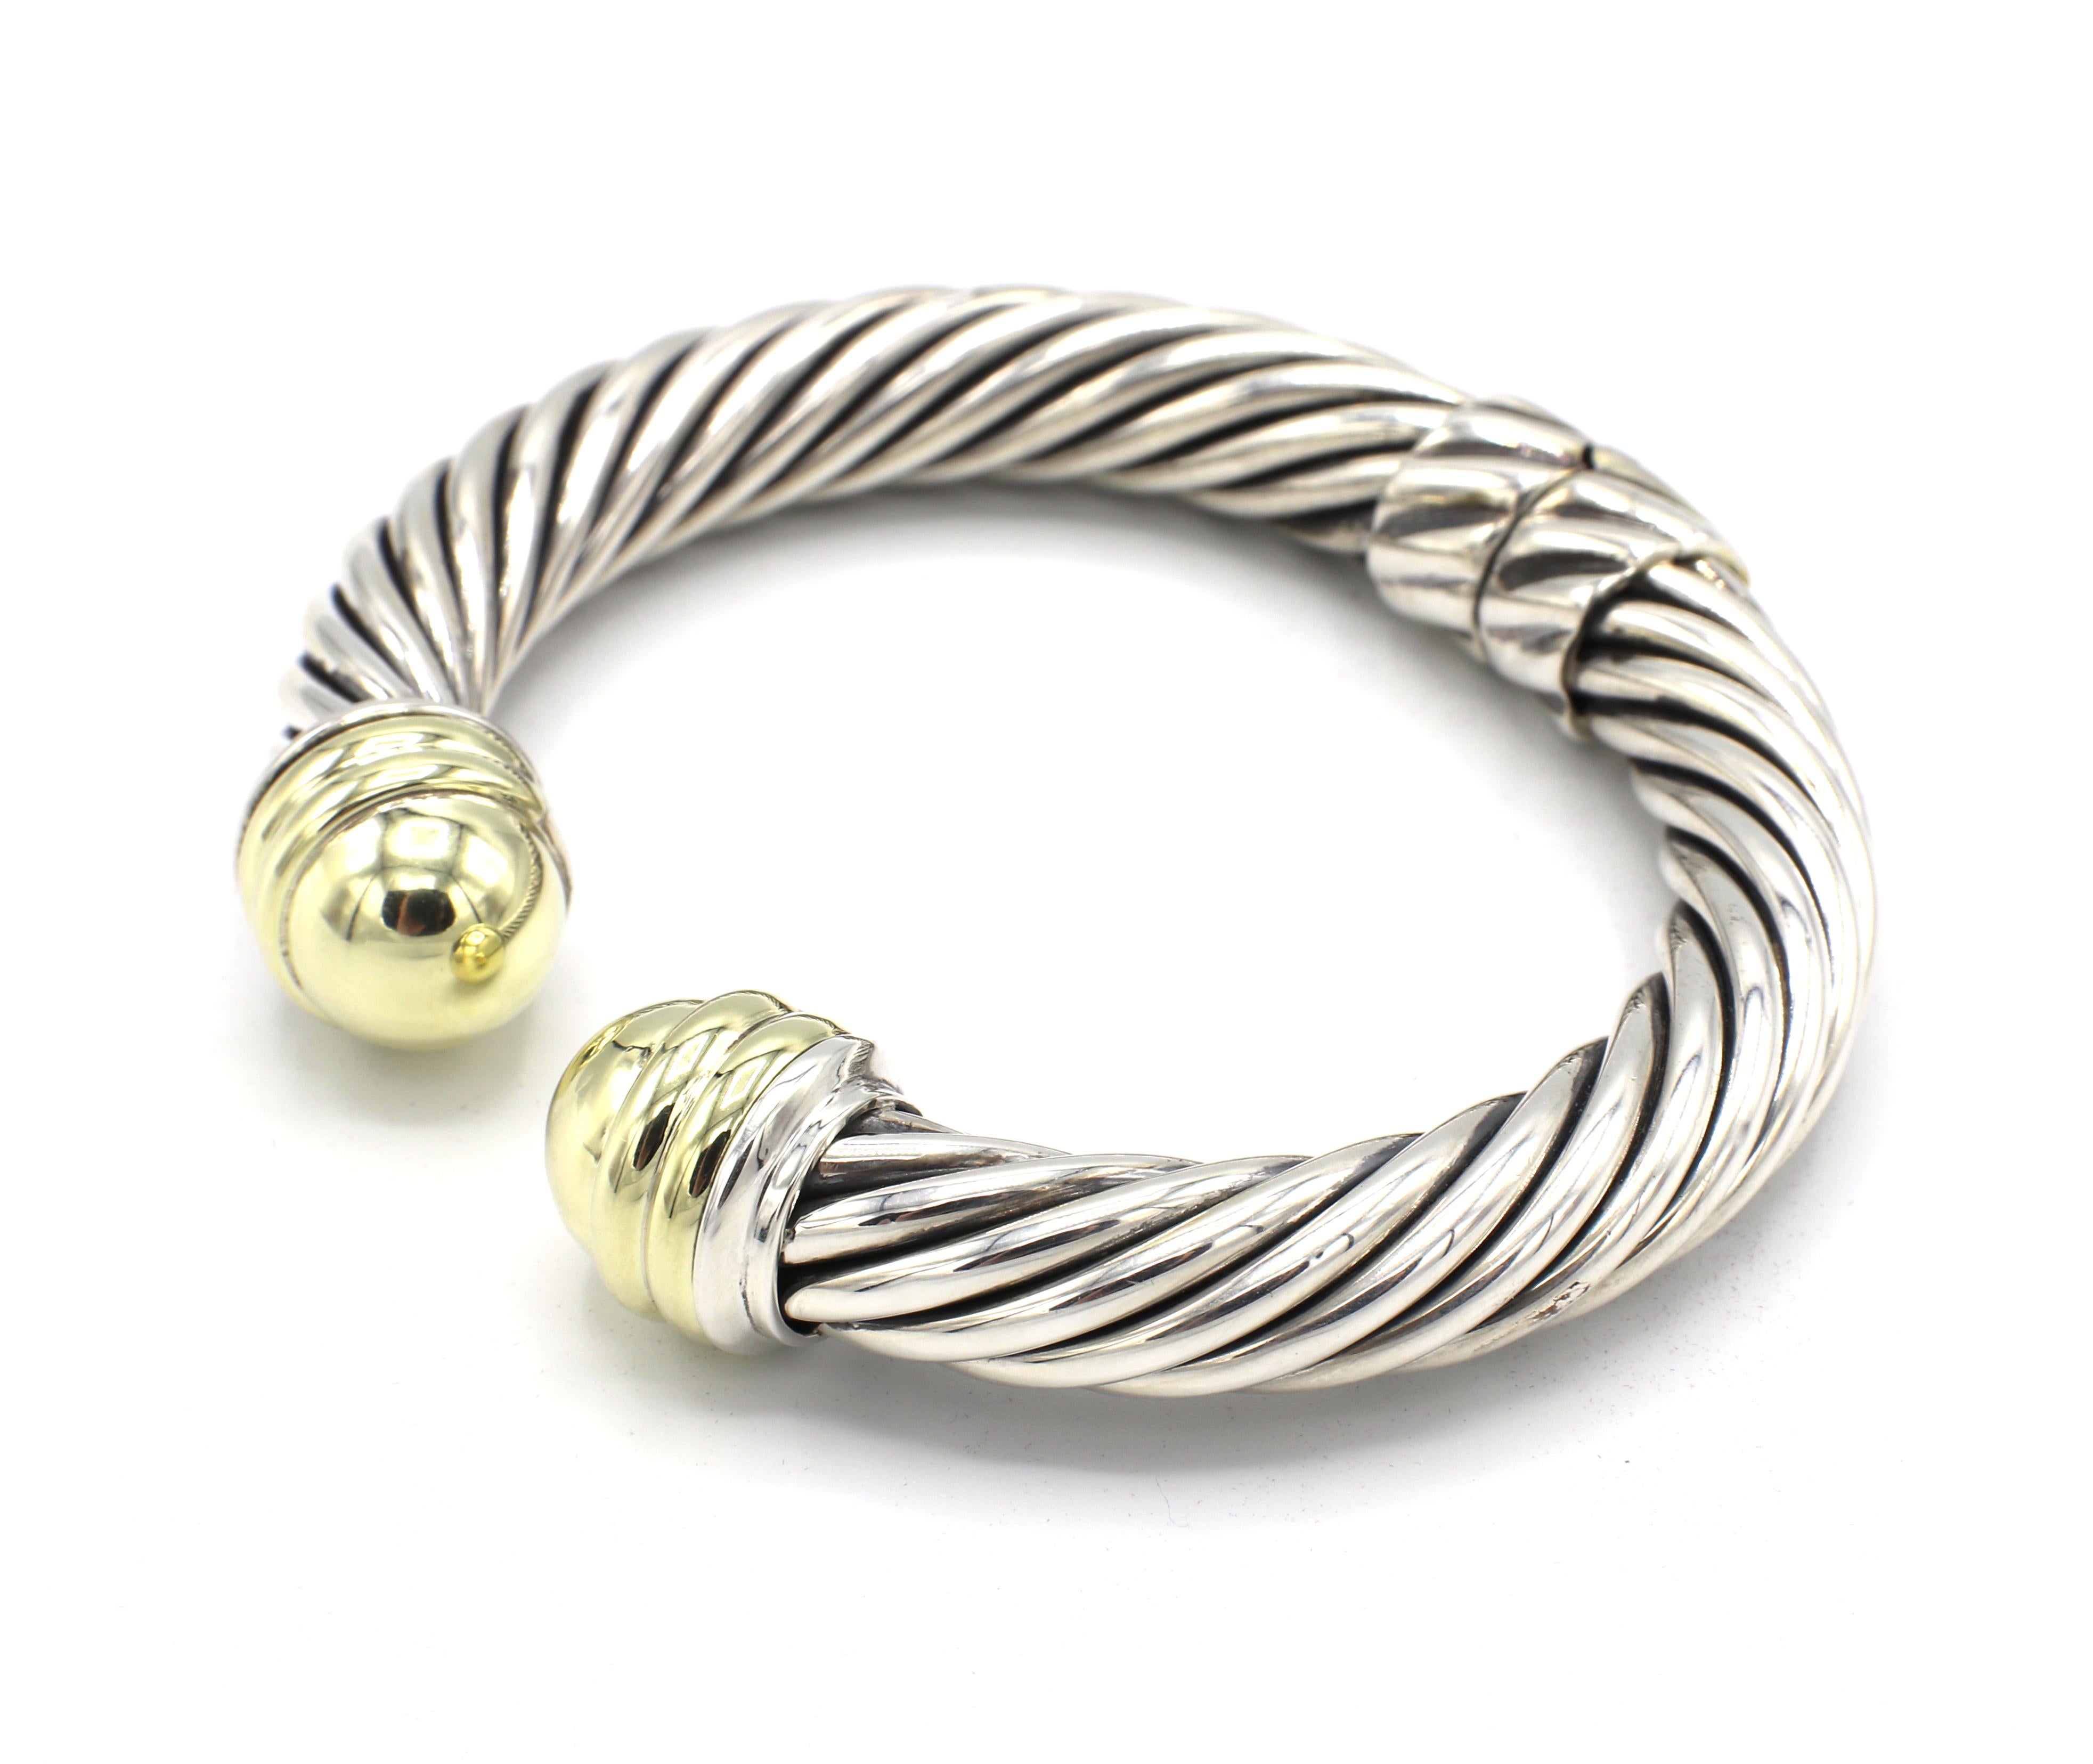 David Yurman Sterling Silver Hinged Cable Classics Bracelet with Gold Domes
Metal: Sterling silver & 14k yellow gold
Weight: 43.8 grams
Diameter: 72.5mm
Width: 9.5 - 14mm
Length: Approx. 6.25 inches 
Signed: D. Yurman Sterling 14k 
Retail: $1,450